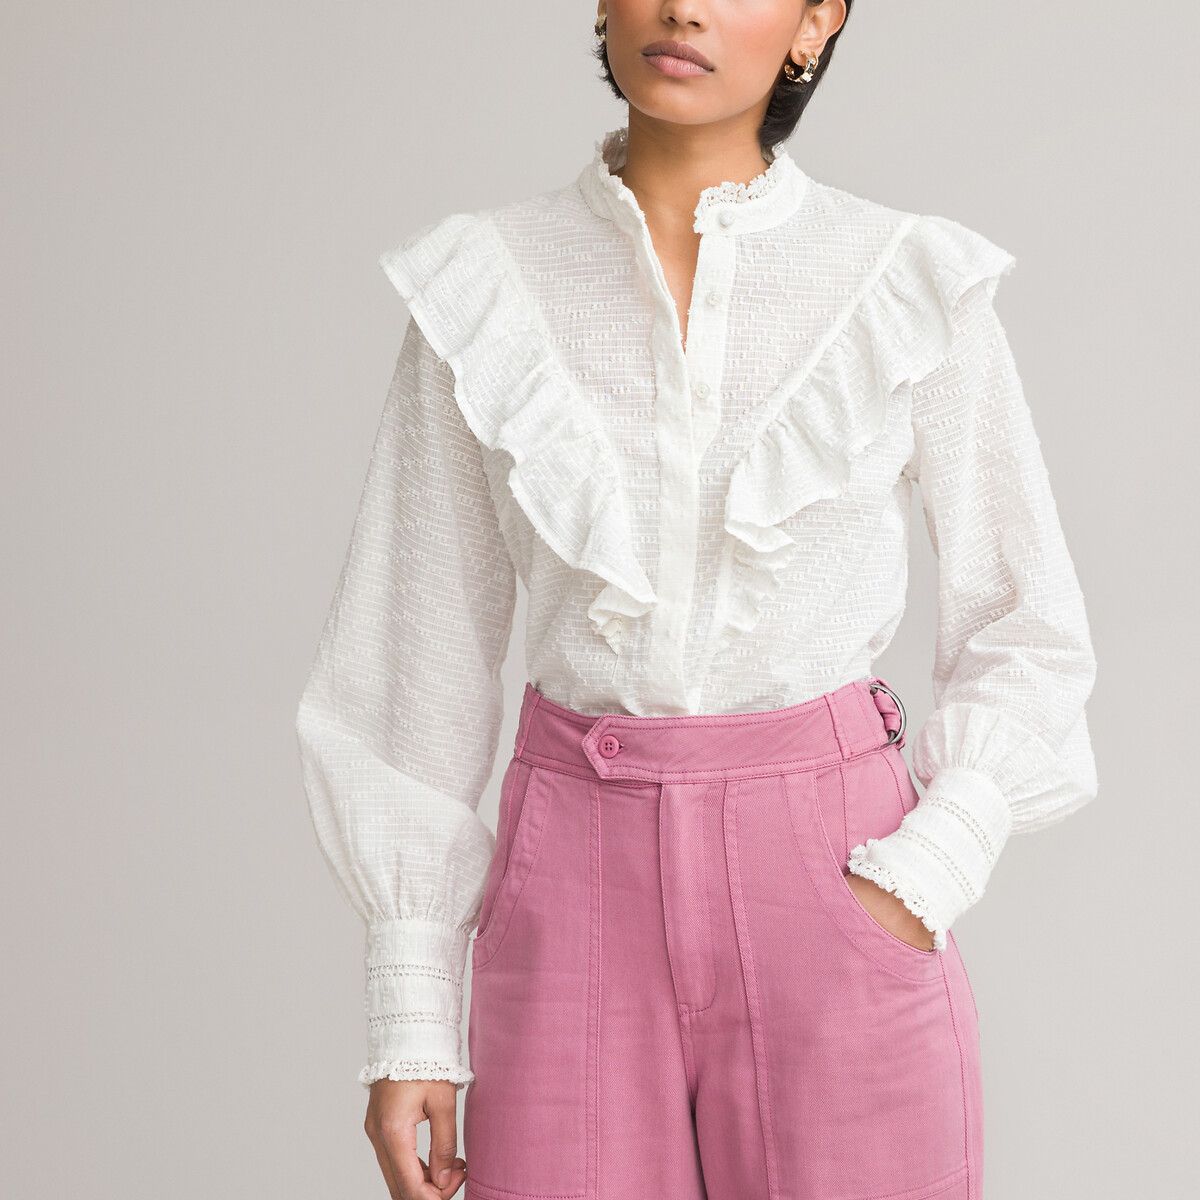 Cotton Ruffled Blouse with High Neck | La Redoute (UK)